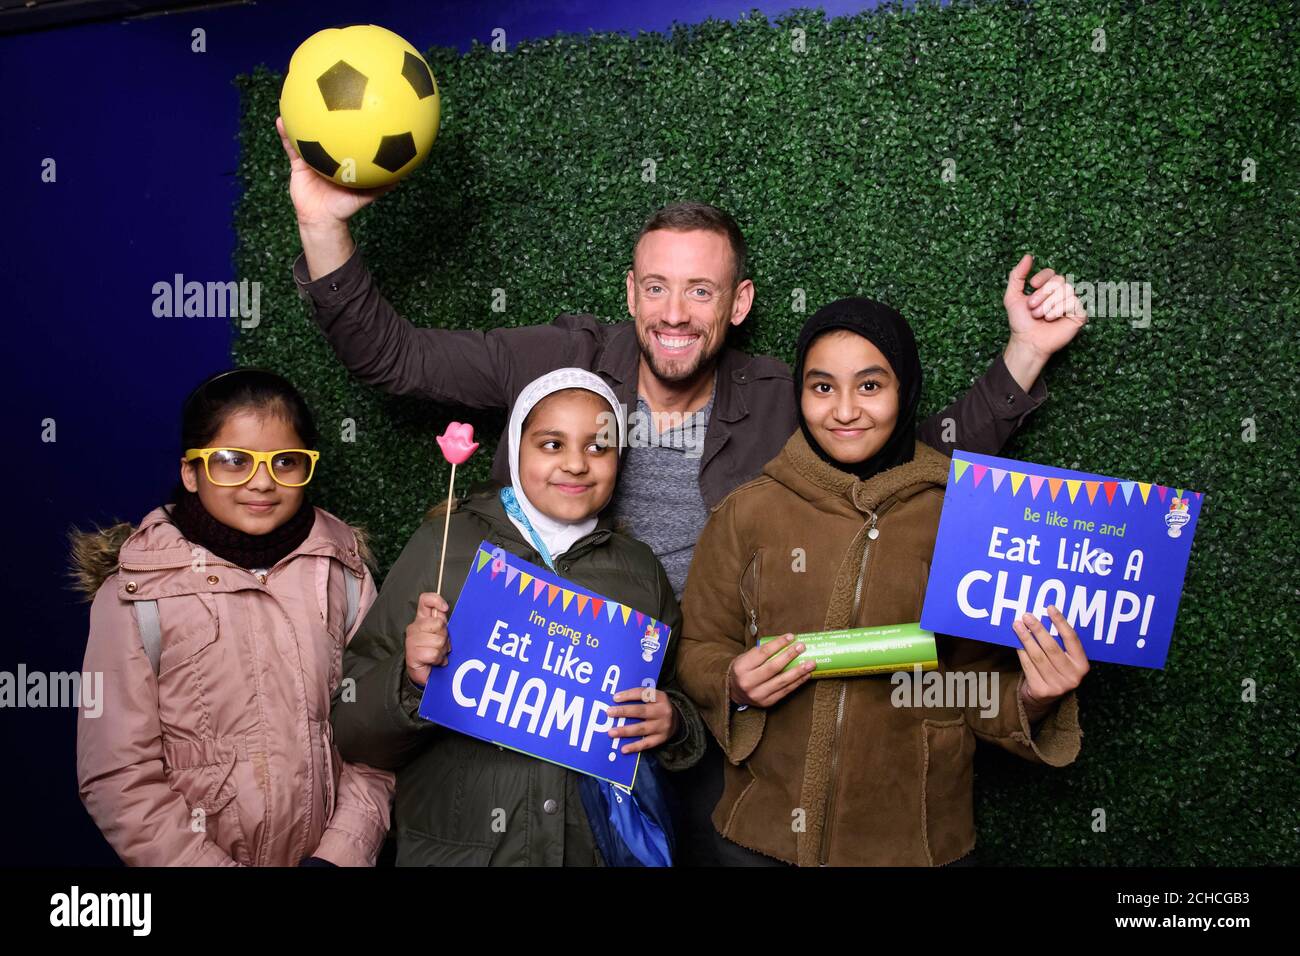 EDITORIAL USE ONLY Radio presenter Sam Pinkham with pupils from schools in Newham at the Eat Like A Champ showcase, a free healthy eating education programme supported by Danone, which aims to promote good nutrition and lifestyle, at Stratford Circus Arts Centre in London.  Stock Photo